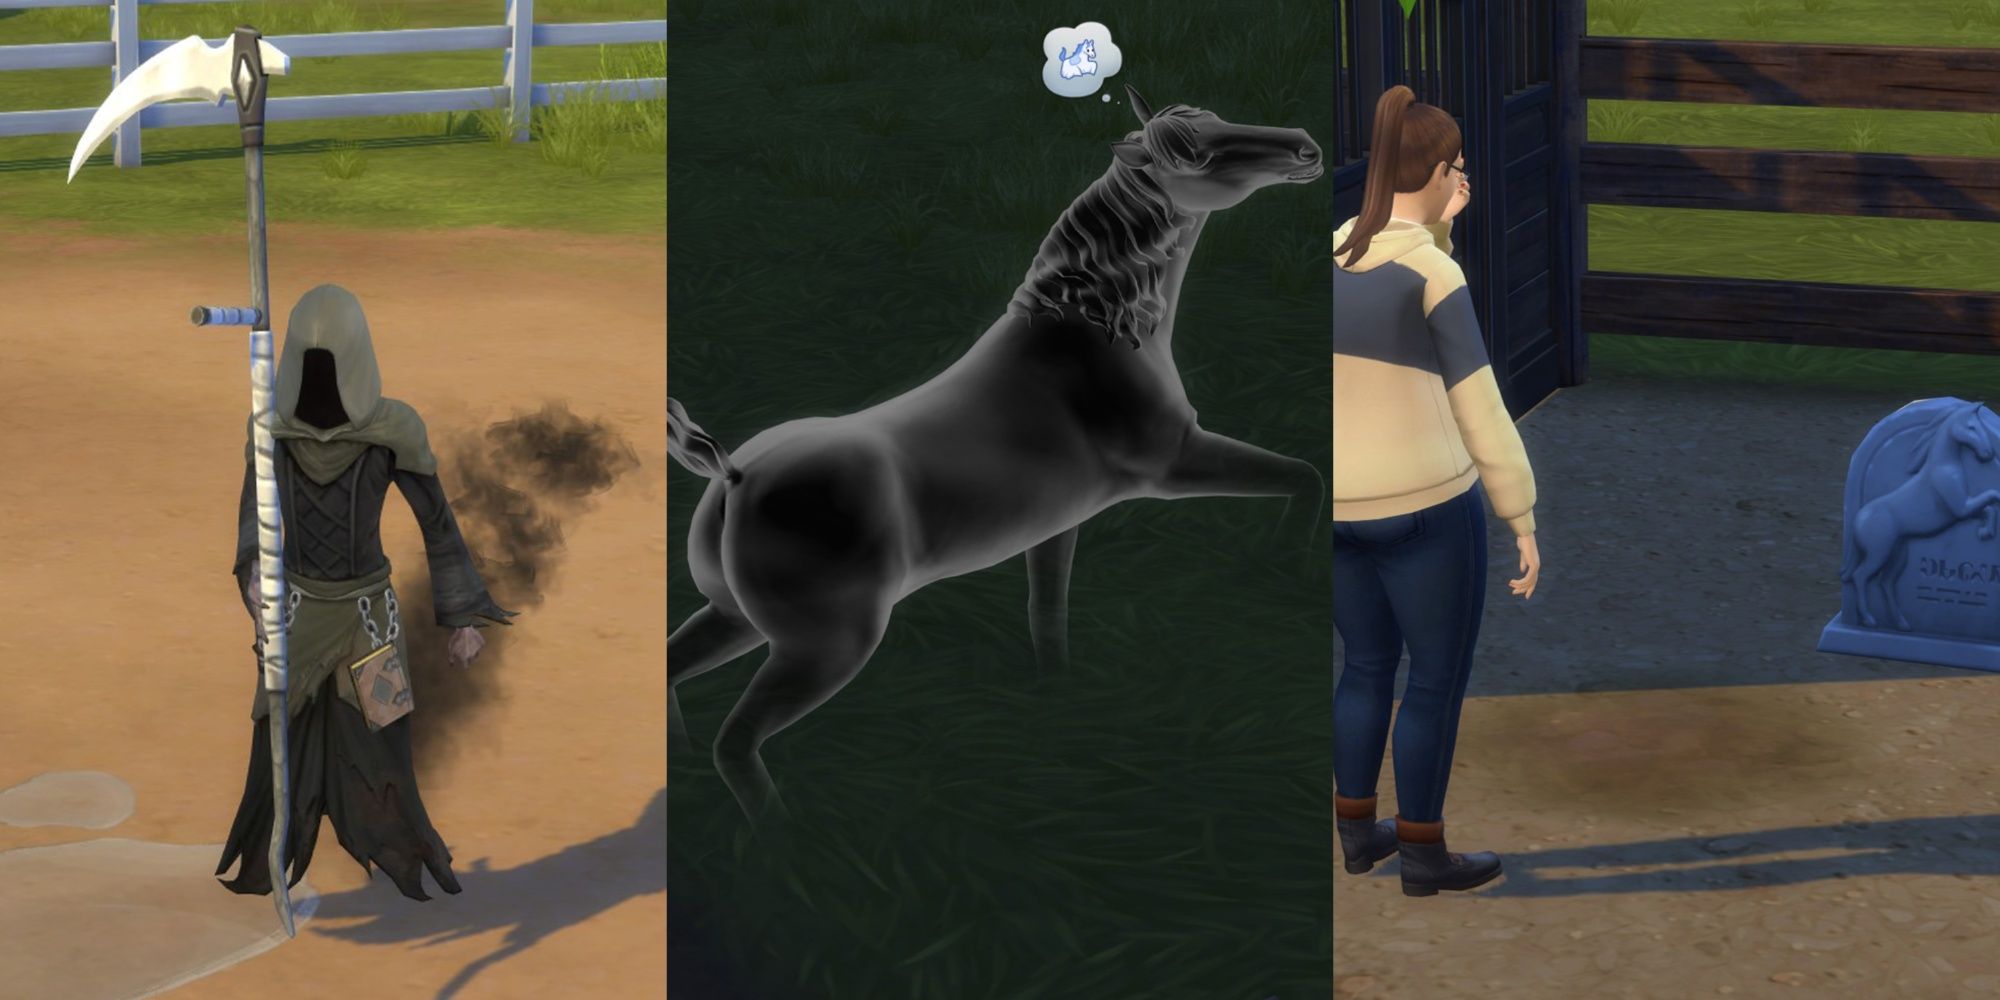 Sims 4 Horse Ranch cheats: How to max out horse skills, Nectar